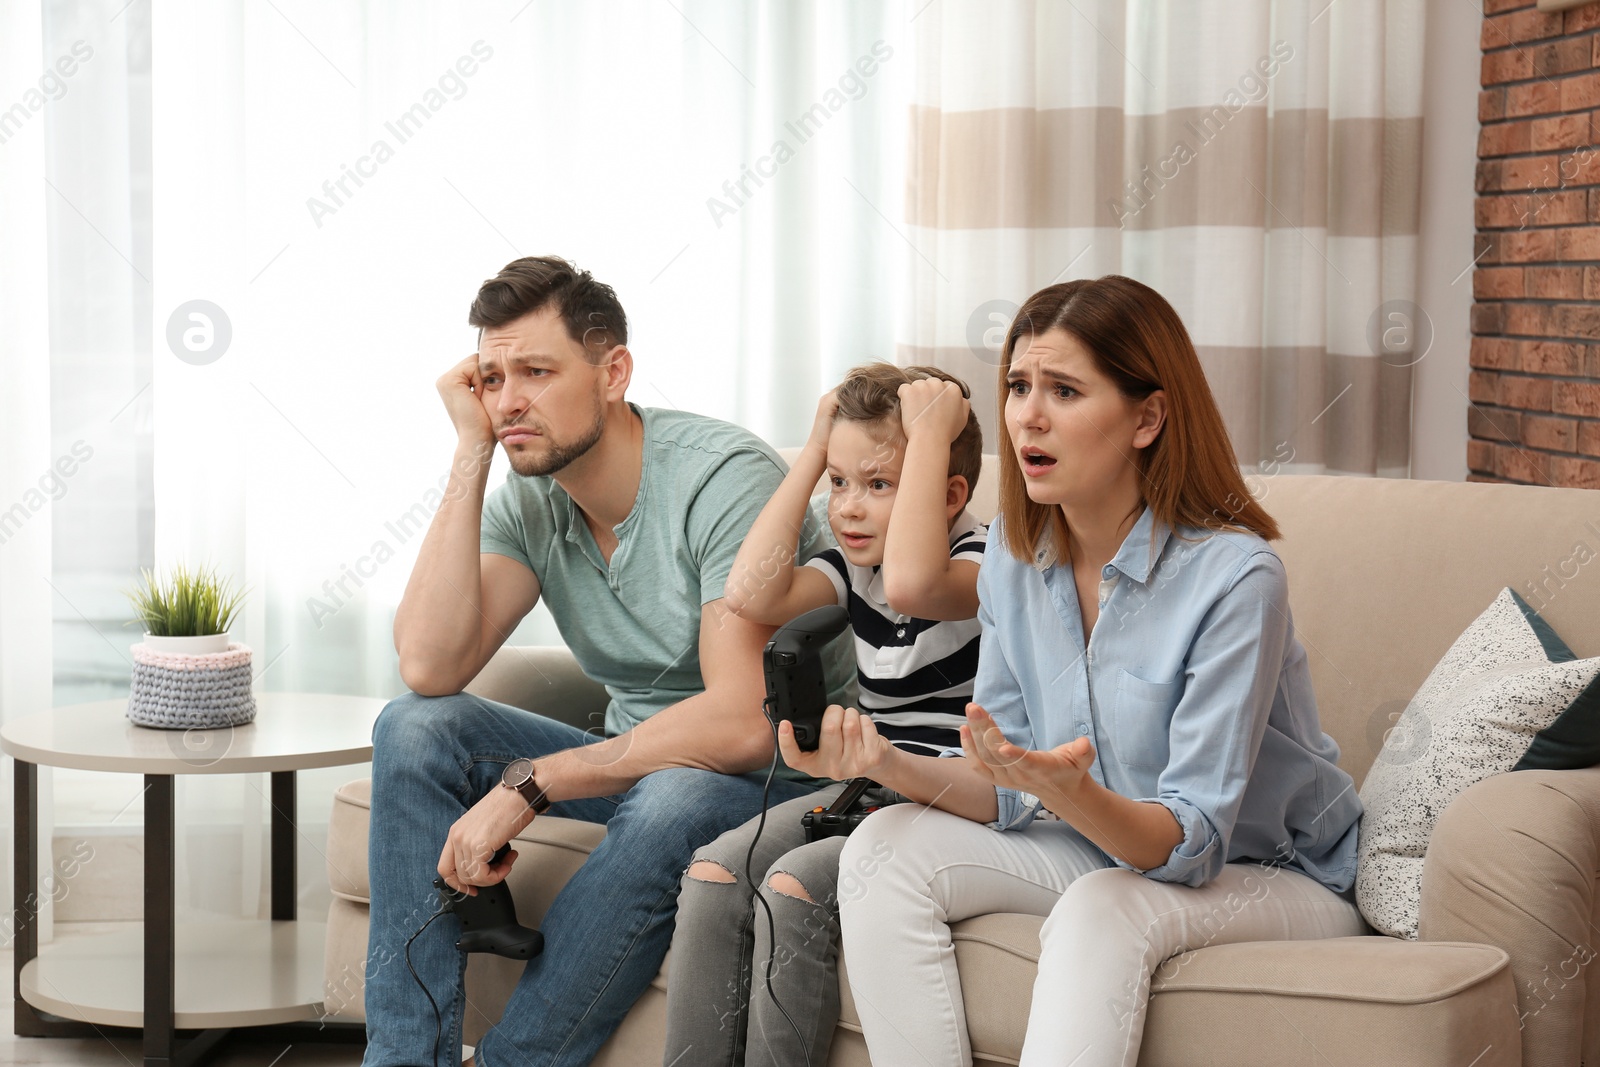 Photo of Family playing video games on sofa in living room